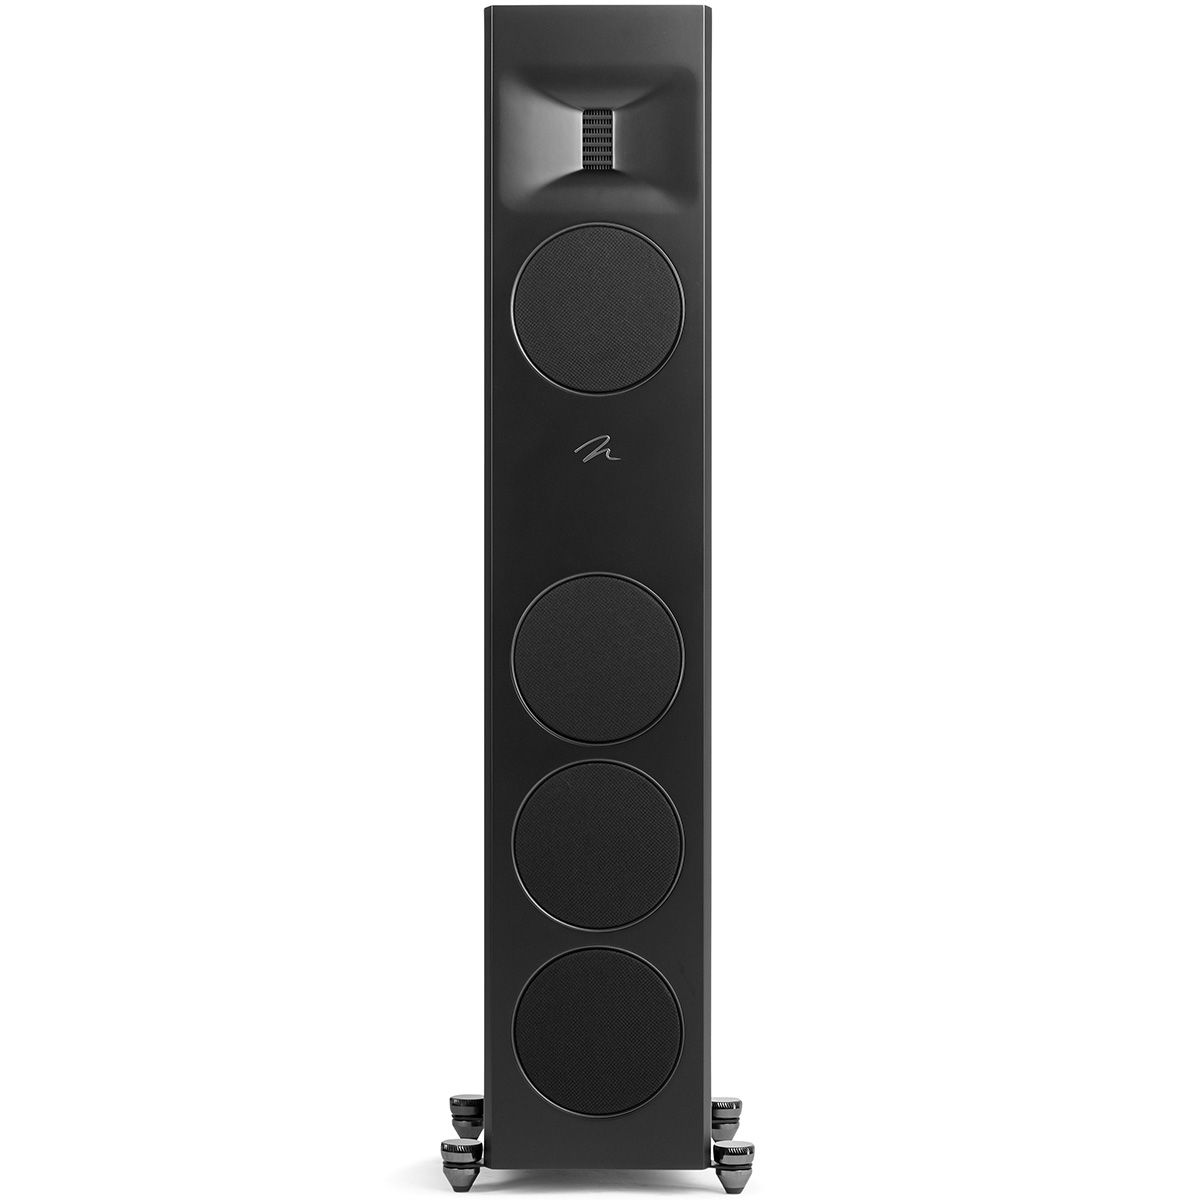 MartinLogan Motion XT F100  Floorstanding Speaker in black, front view without grilles on white background